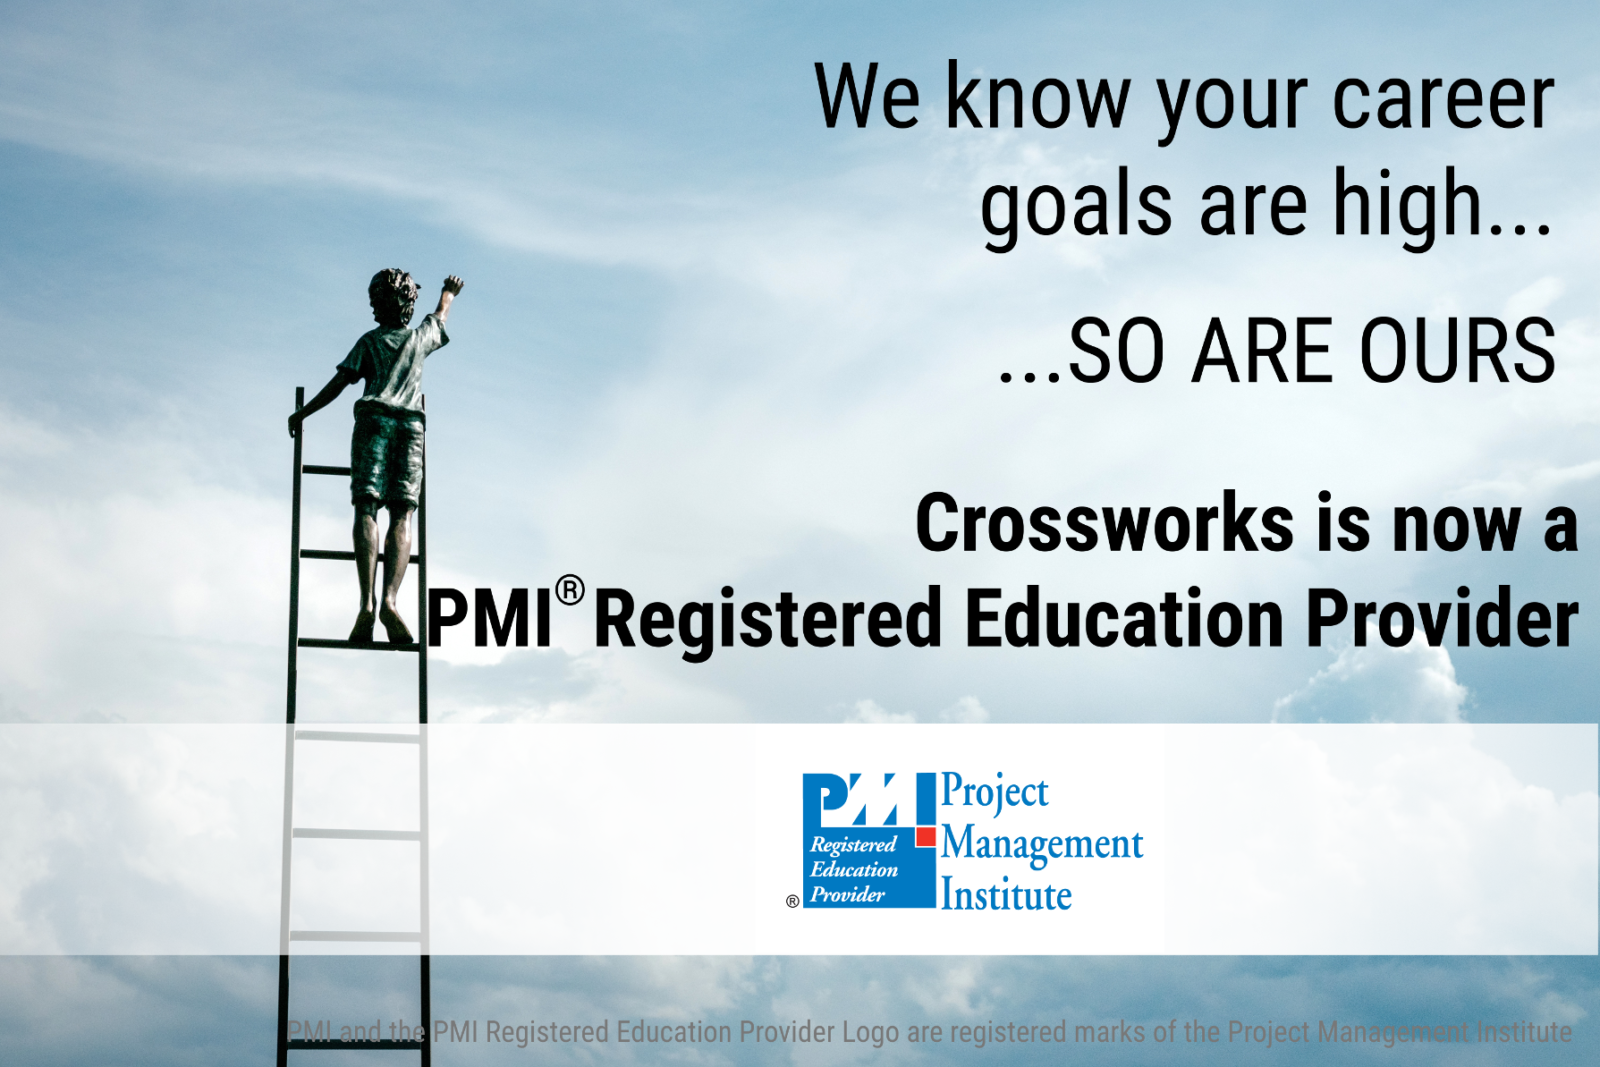 Crossworks is now a PMI Registered Education Provider